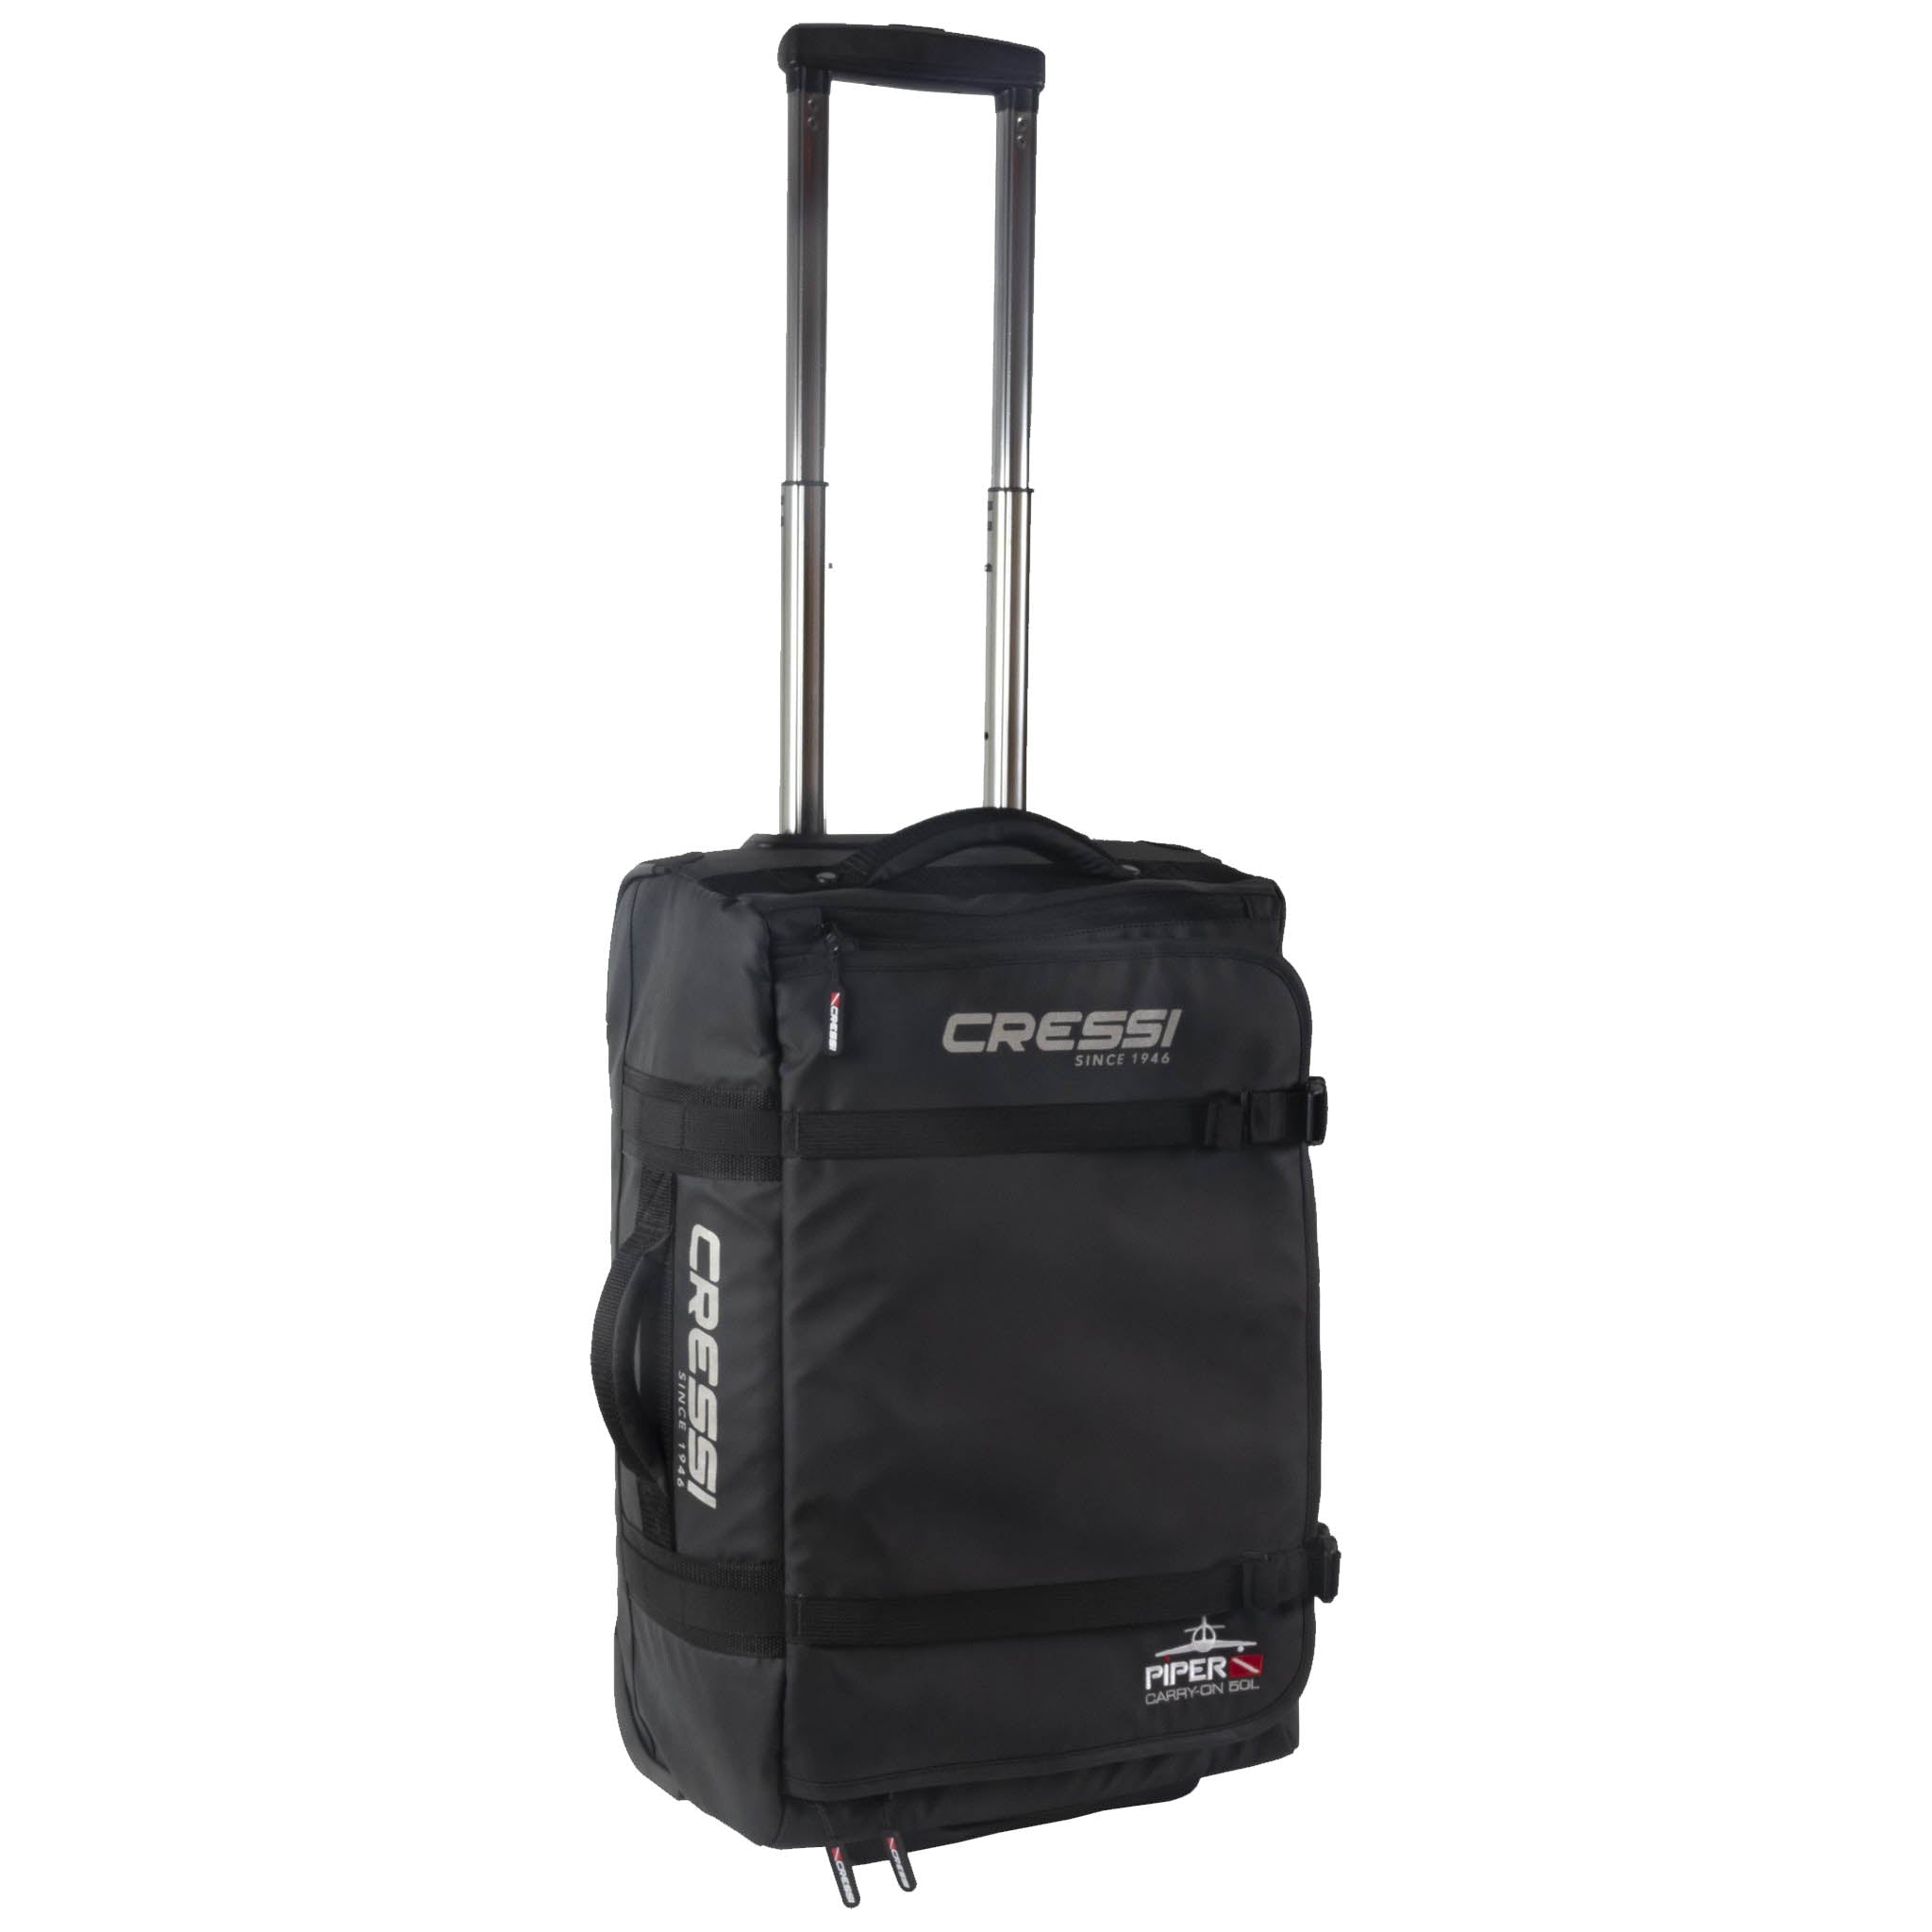 Piper Ultralight Carry-On Wheeled Bag | Adjustable height handle